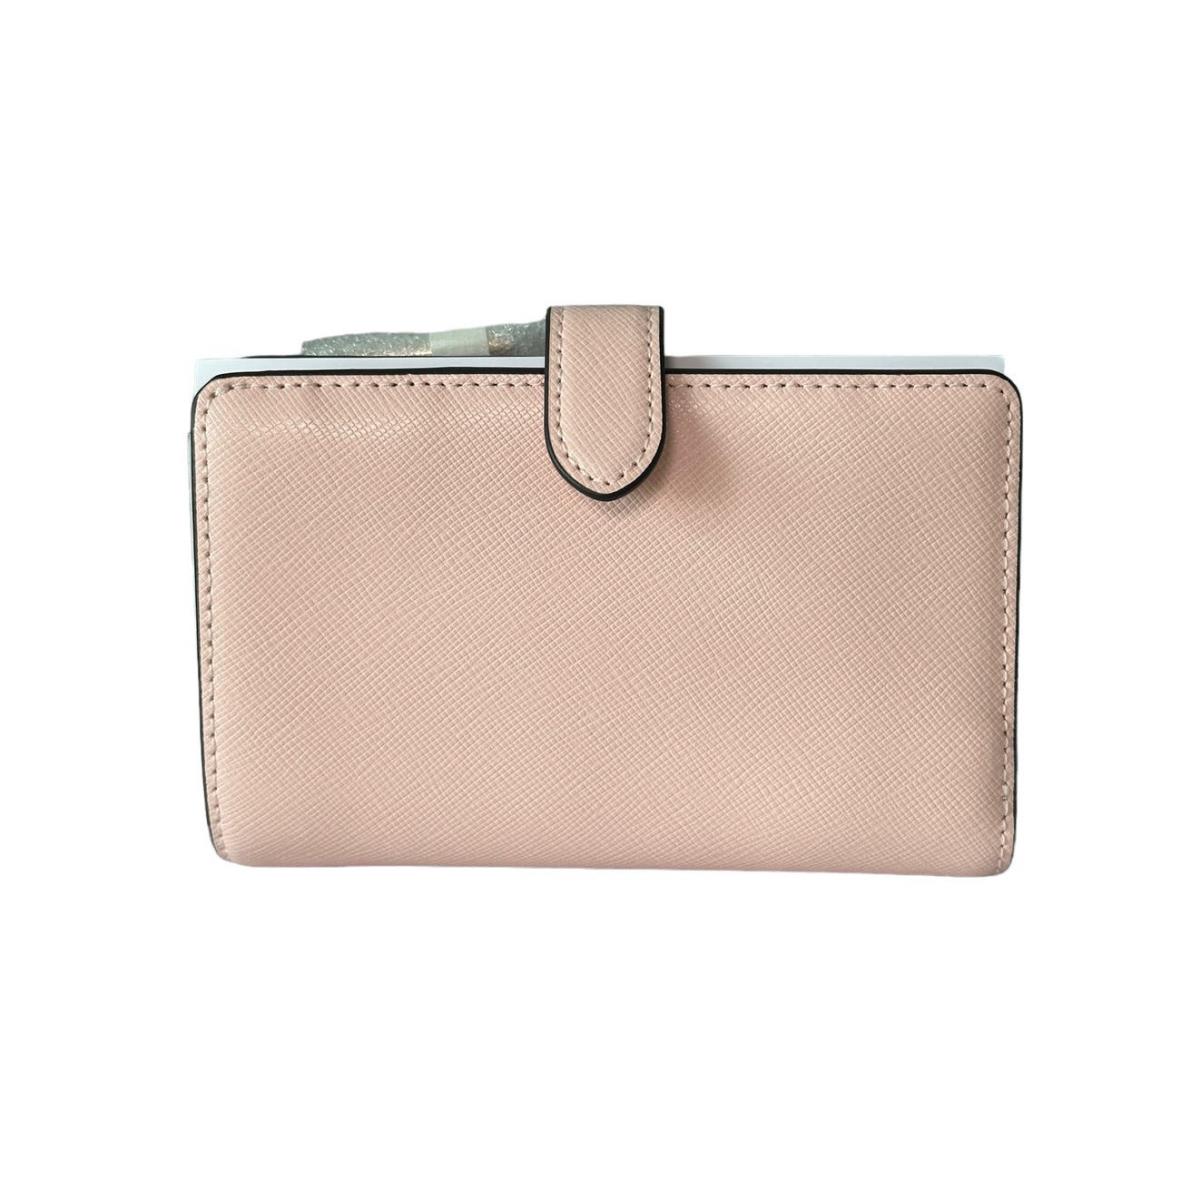 Kate Spade Madison Medium Compact Bifold Wallet in Conch Pink